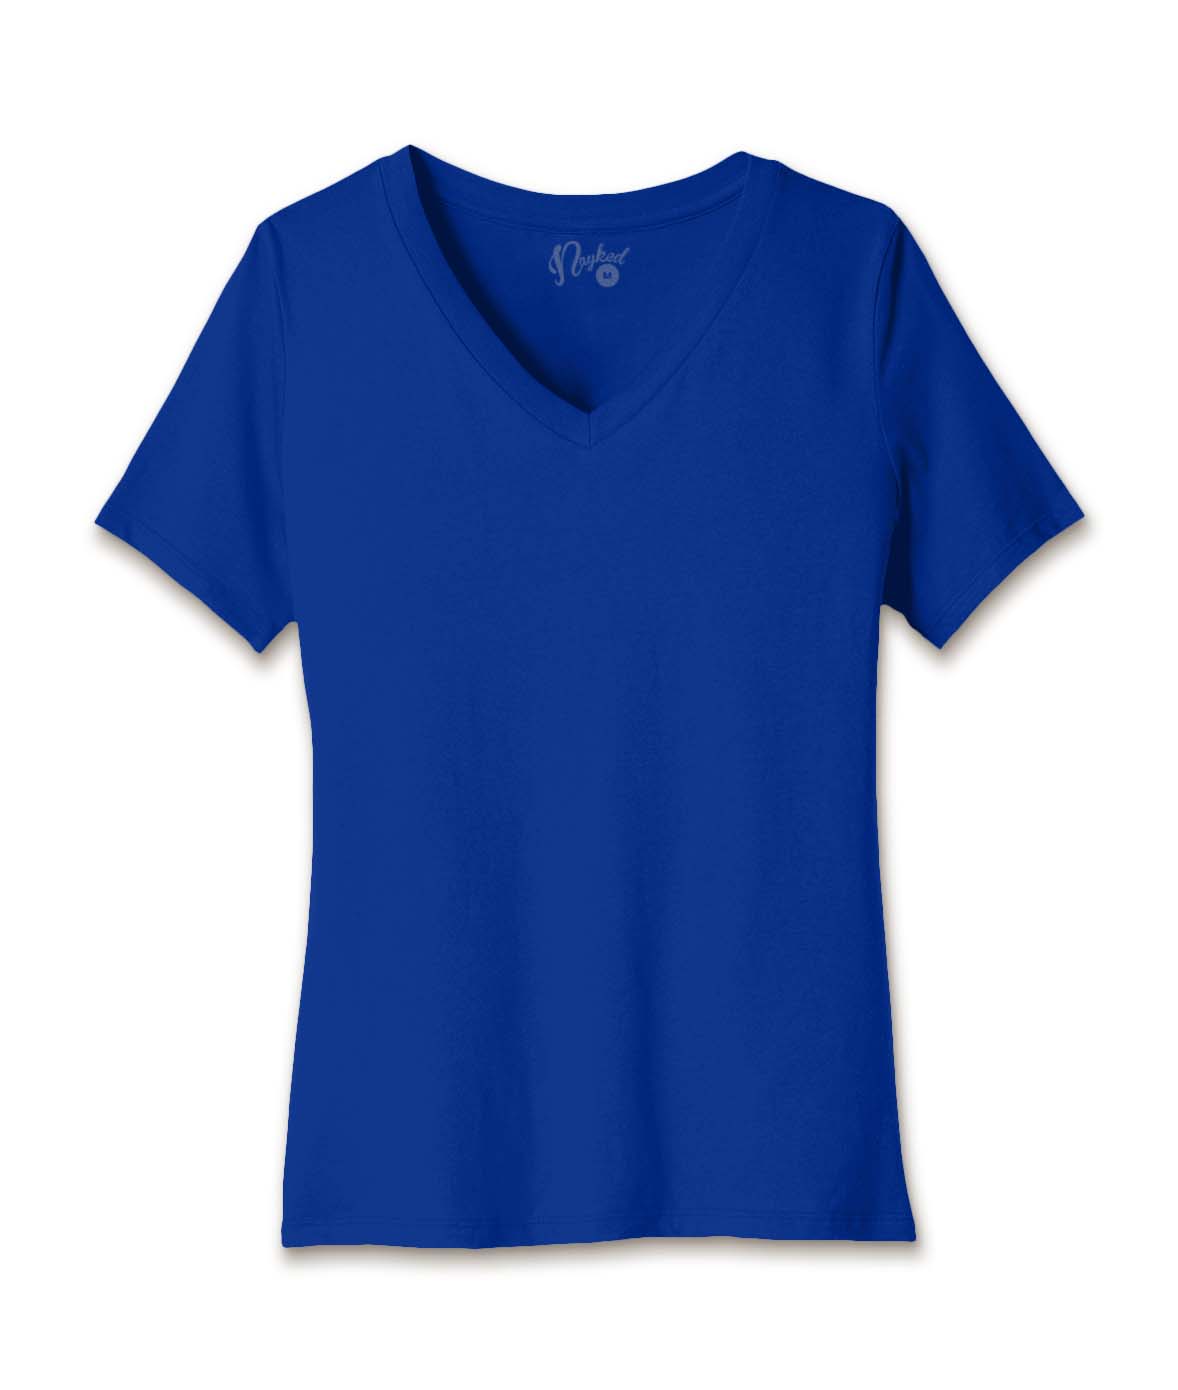 Nayked Women's Ridiculously Fit 100% V-Neck T- Shirt